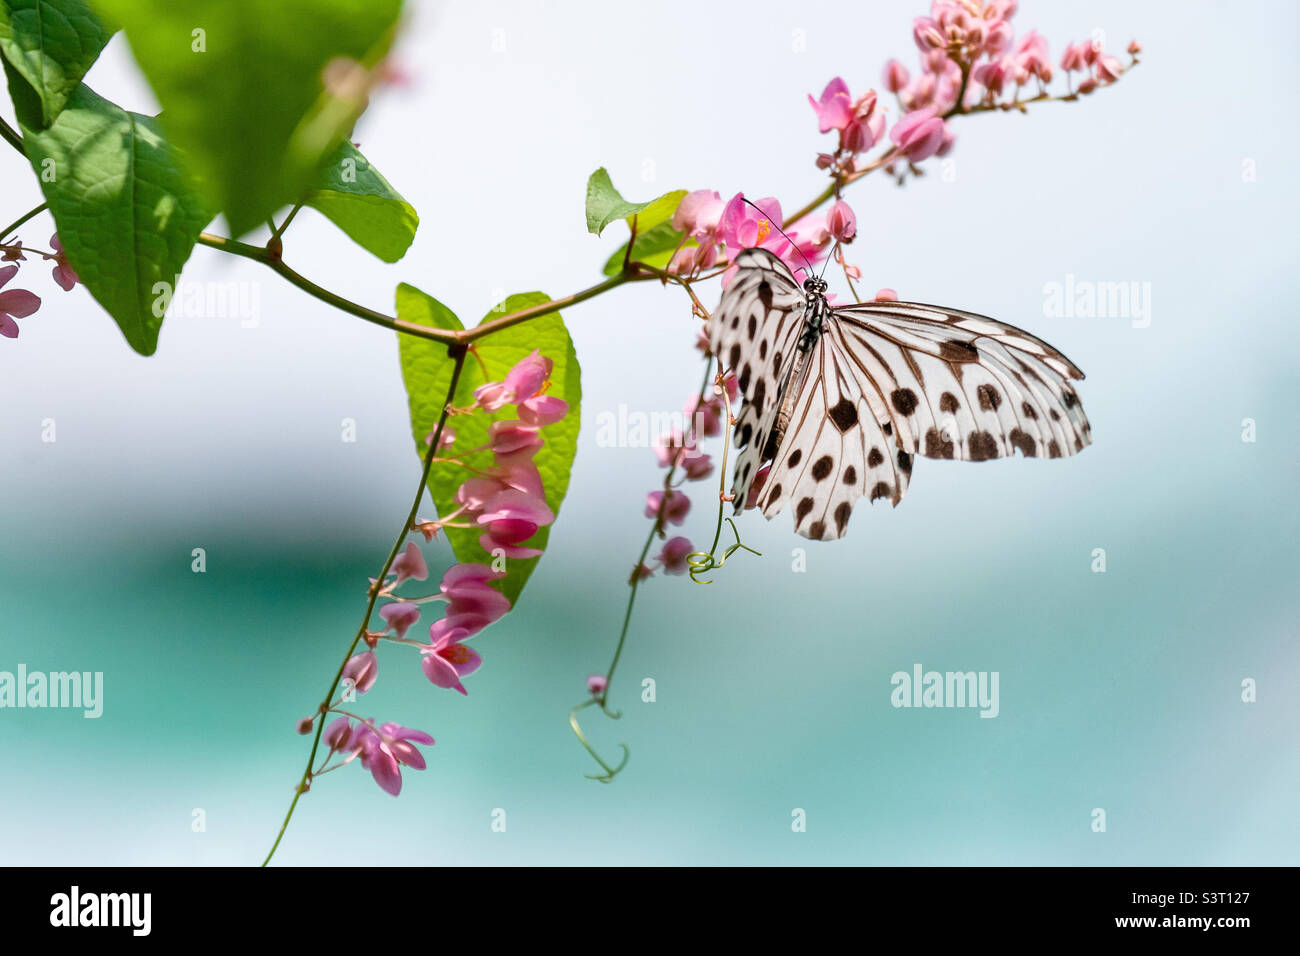 Exotic butterfly with black dots on a green plant Stock Photo